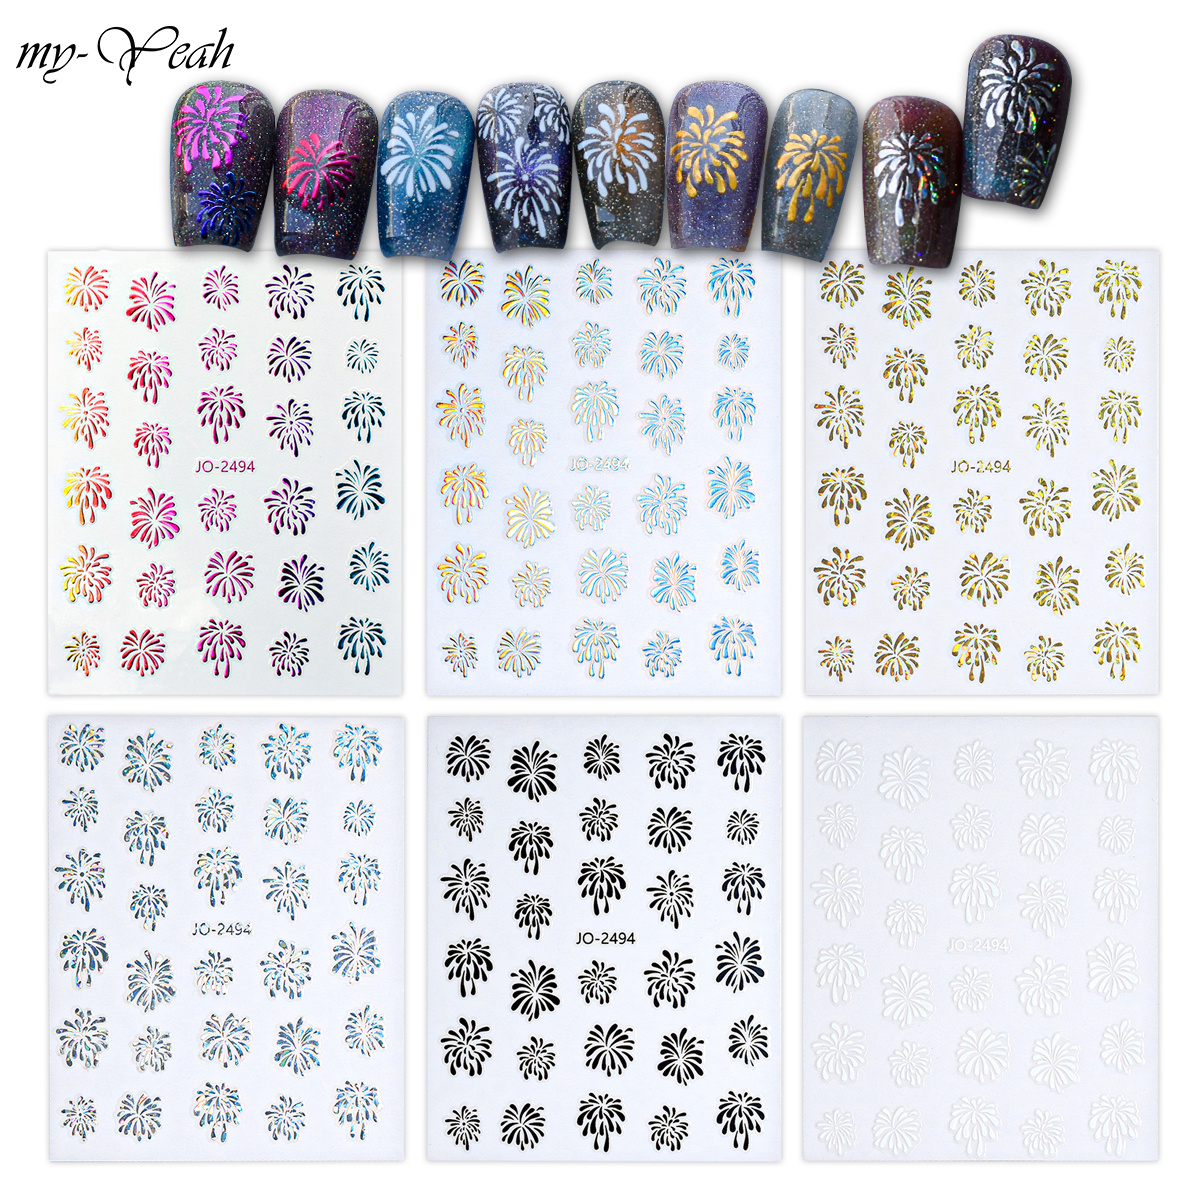 myyeah Nail Art Stickers 6 Colors Fireworks Pattern Holographic Self